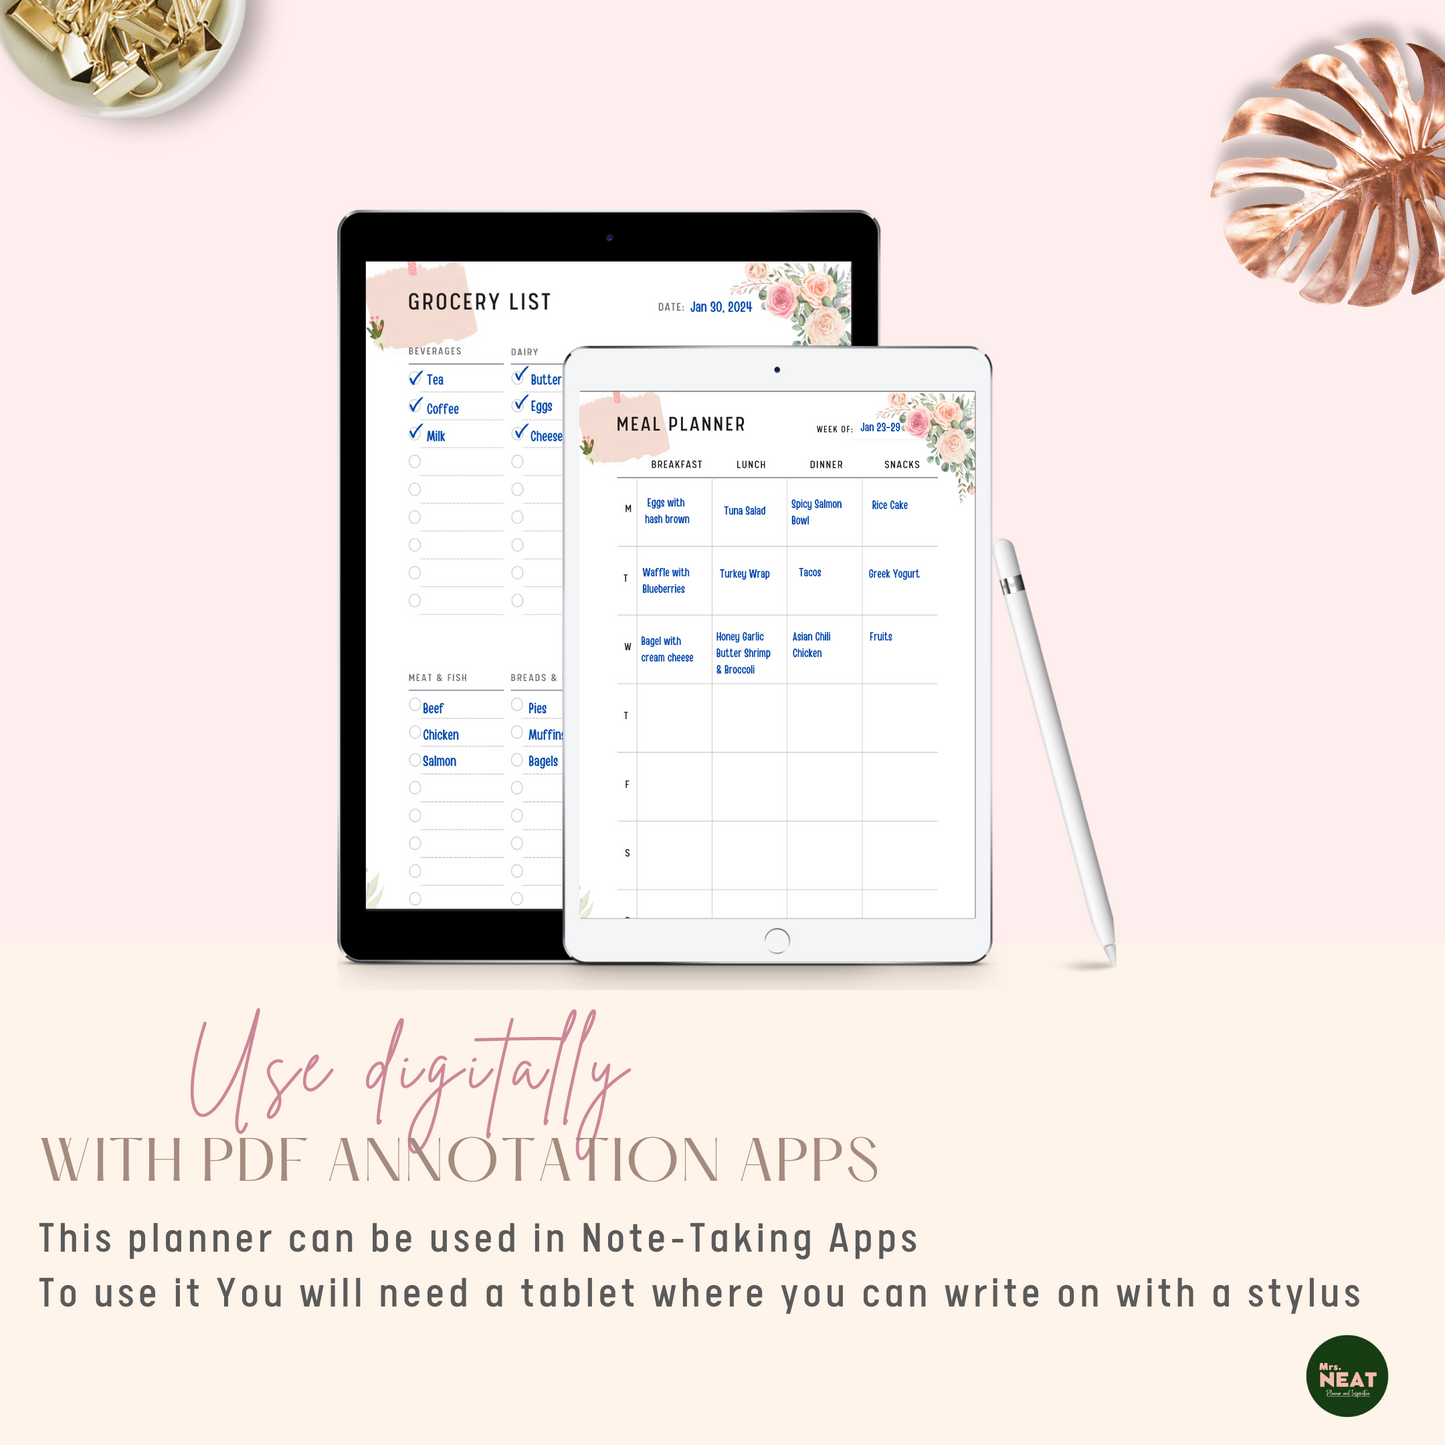 Floral Grocery Shopping List and Weekly Meal Planner used Digitally with Tablet and Stylus